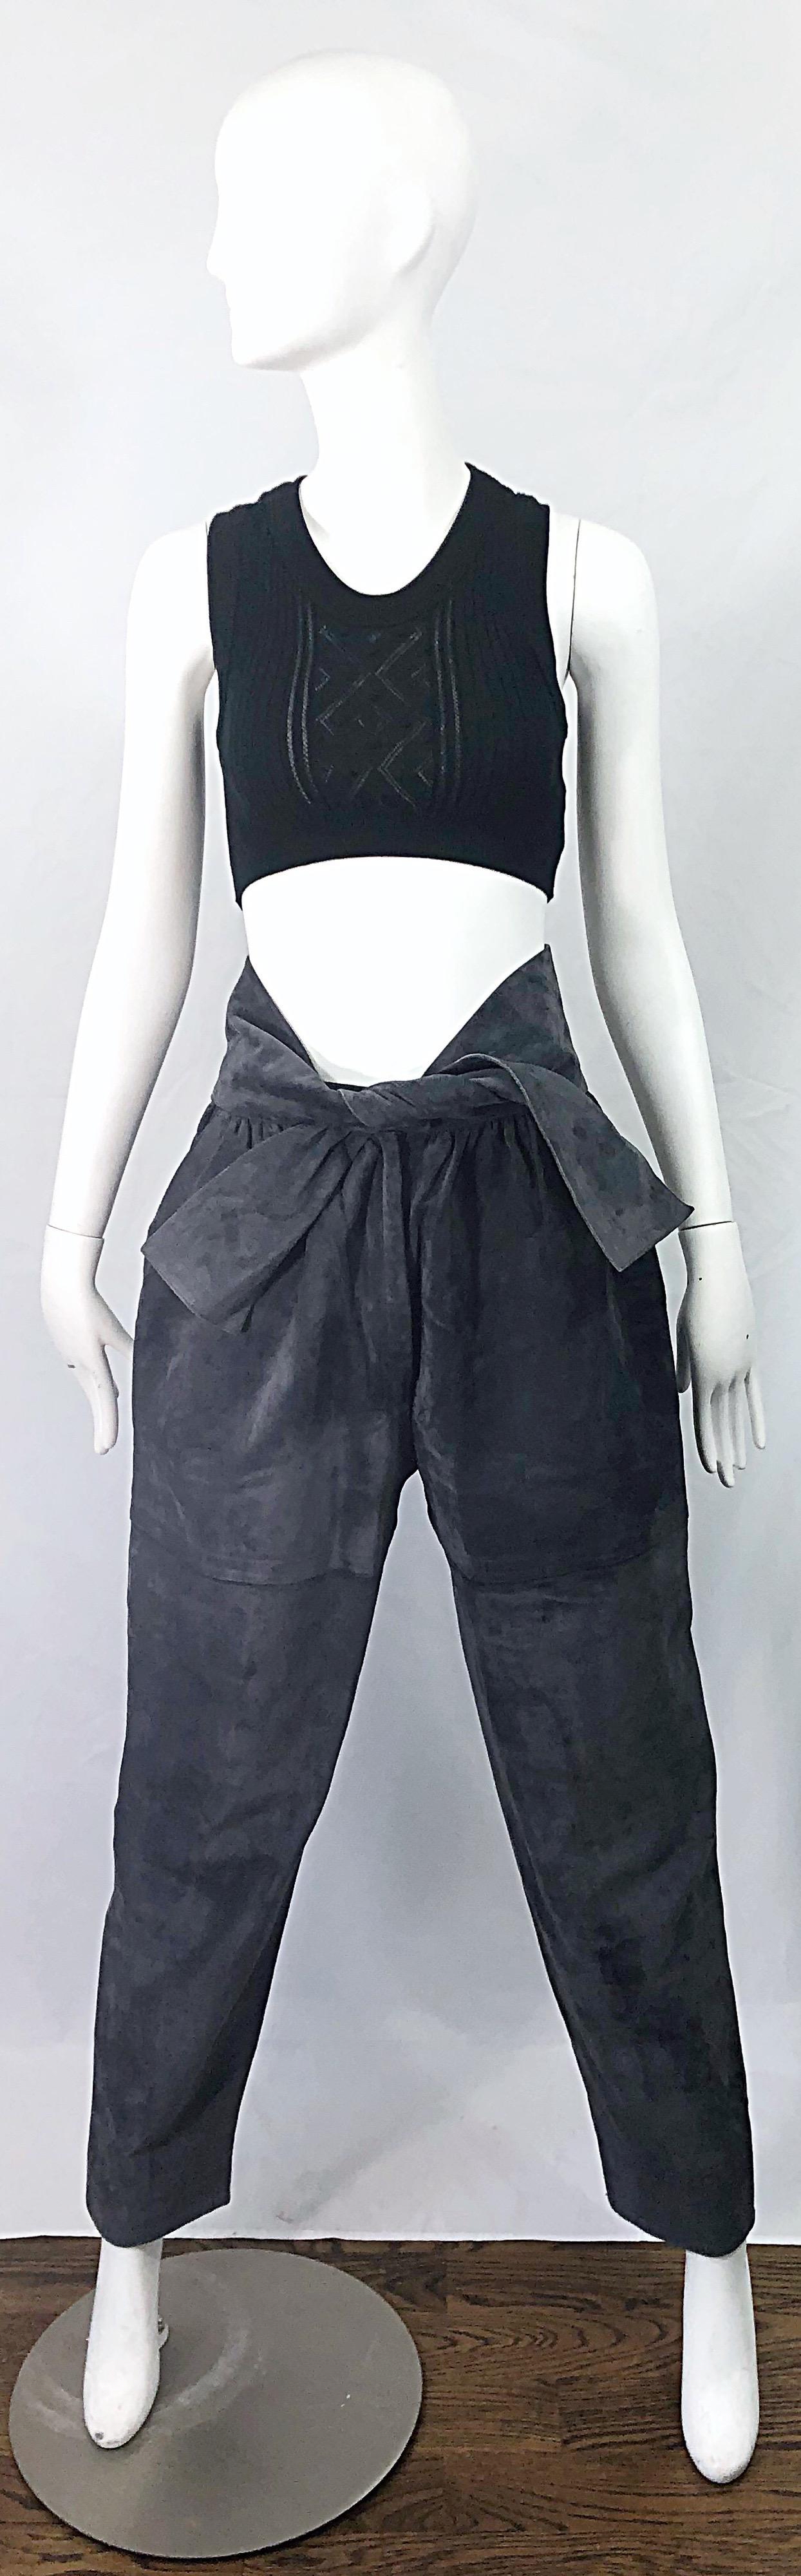 Amazing collectible RARE vintage early 80s YVES SAINT LAURENT Rive Gauche elephant gray suede leather high waisted harem pants / trousers ! Features a high waist with pockets at each side of the hips. Attached tie belt ties at center waist. Hidden